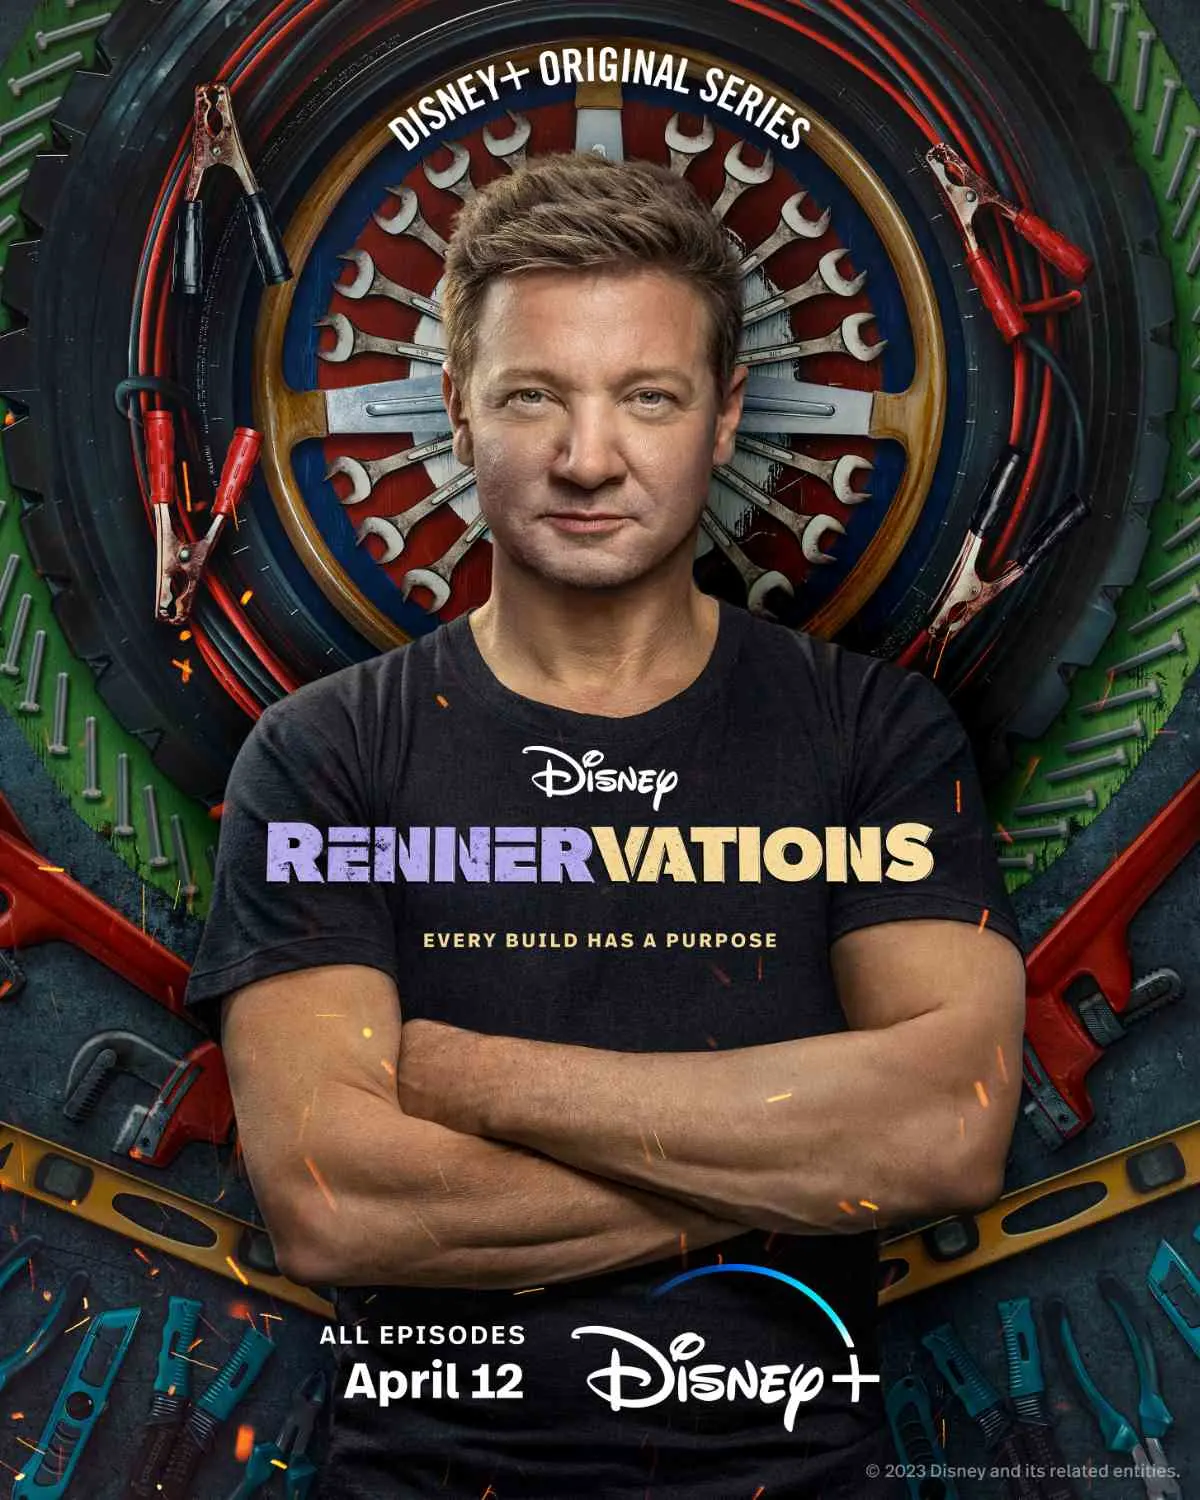 Rennervations Trailer, Key Art and Premiere Date